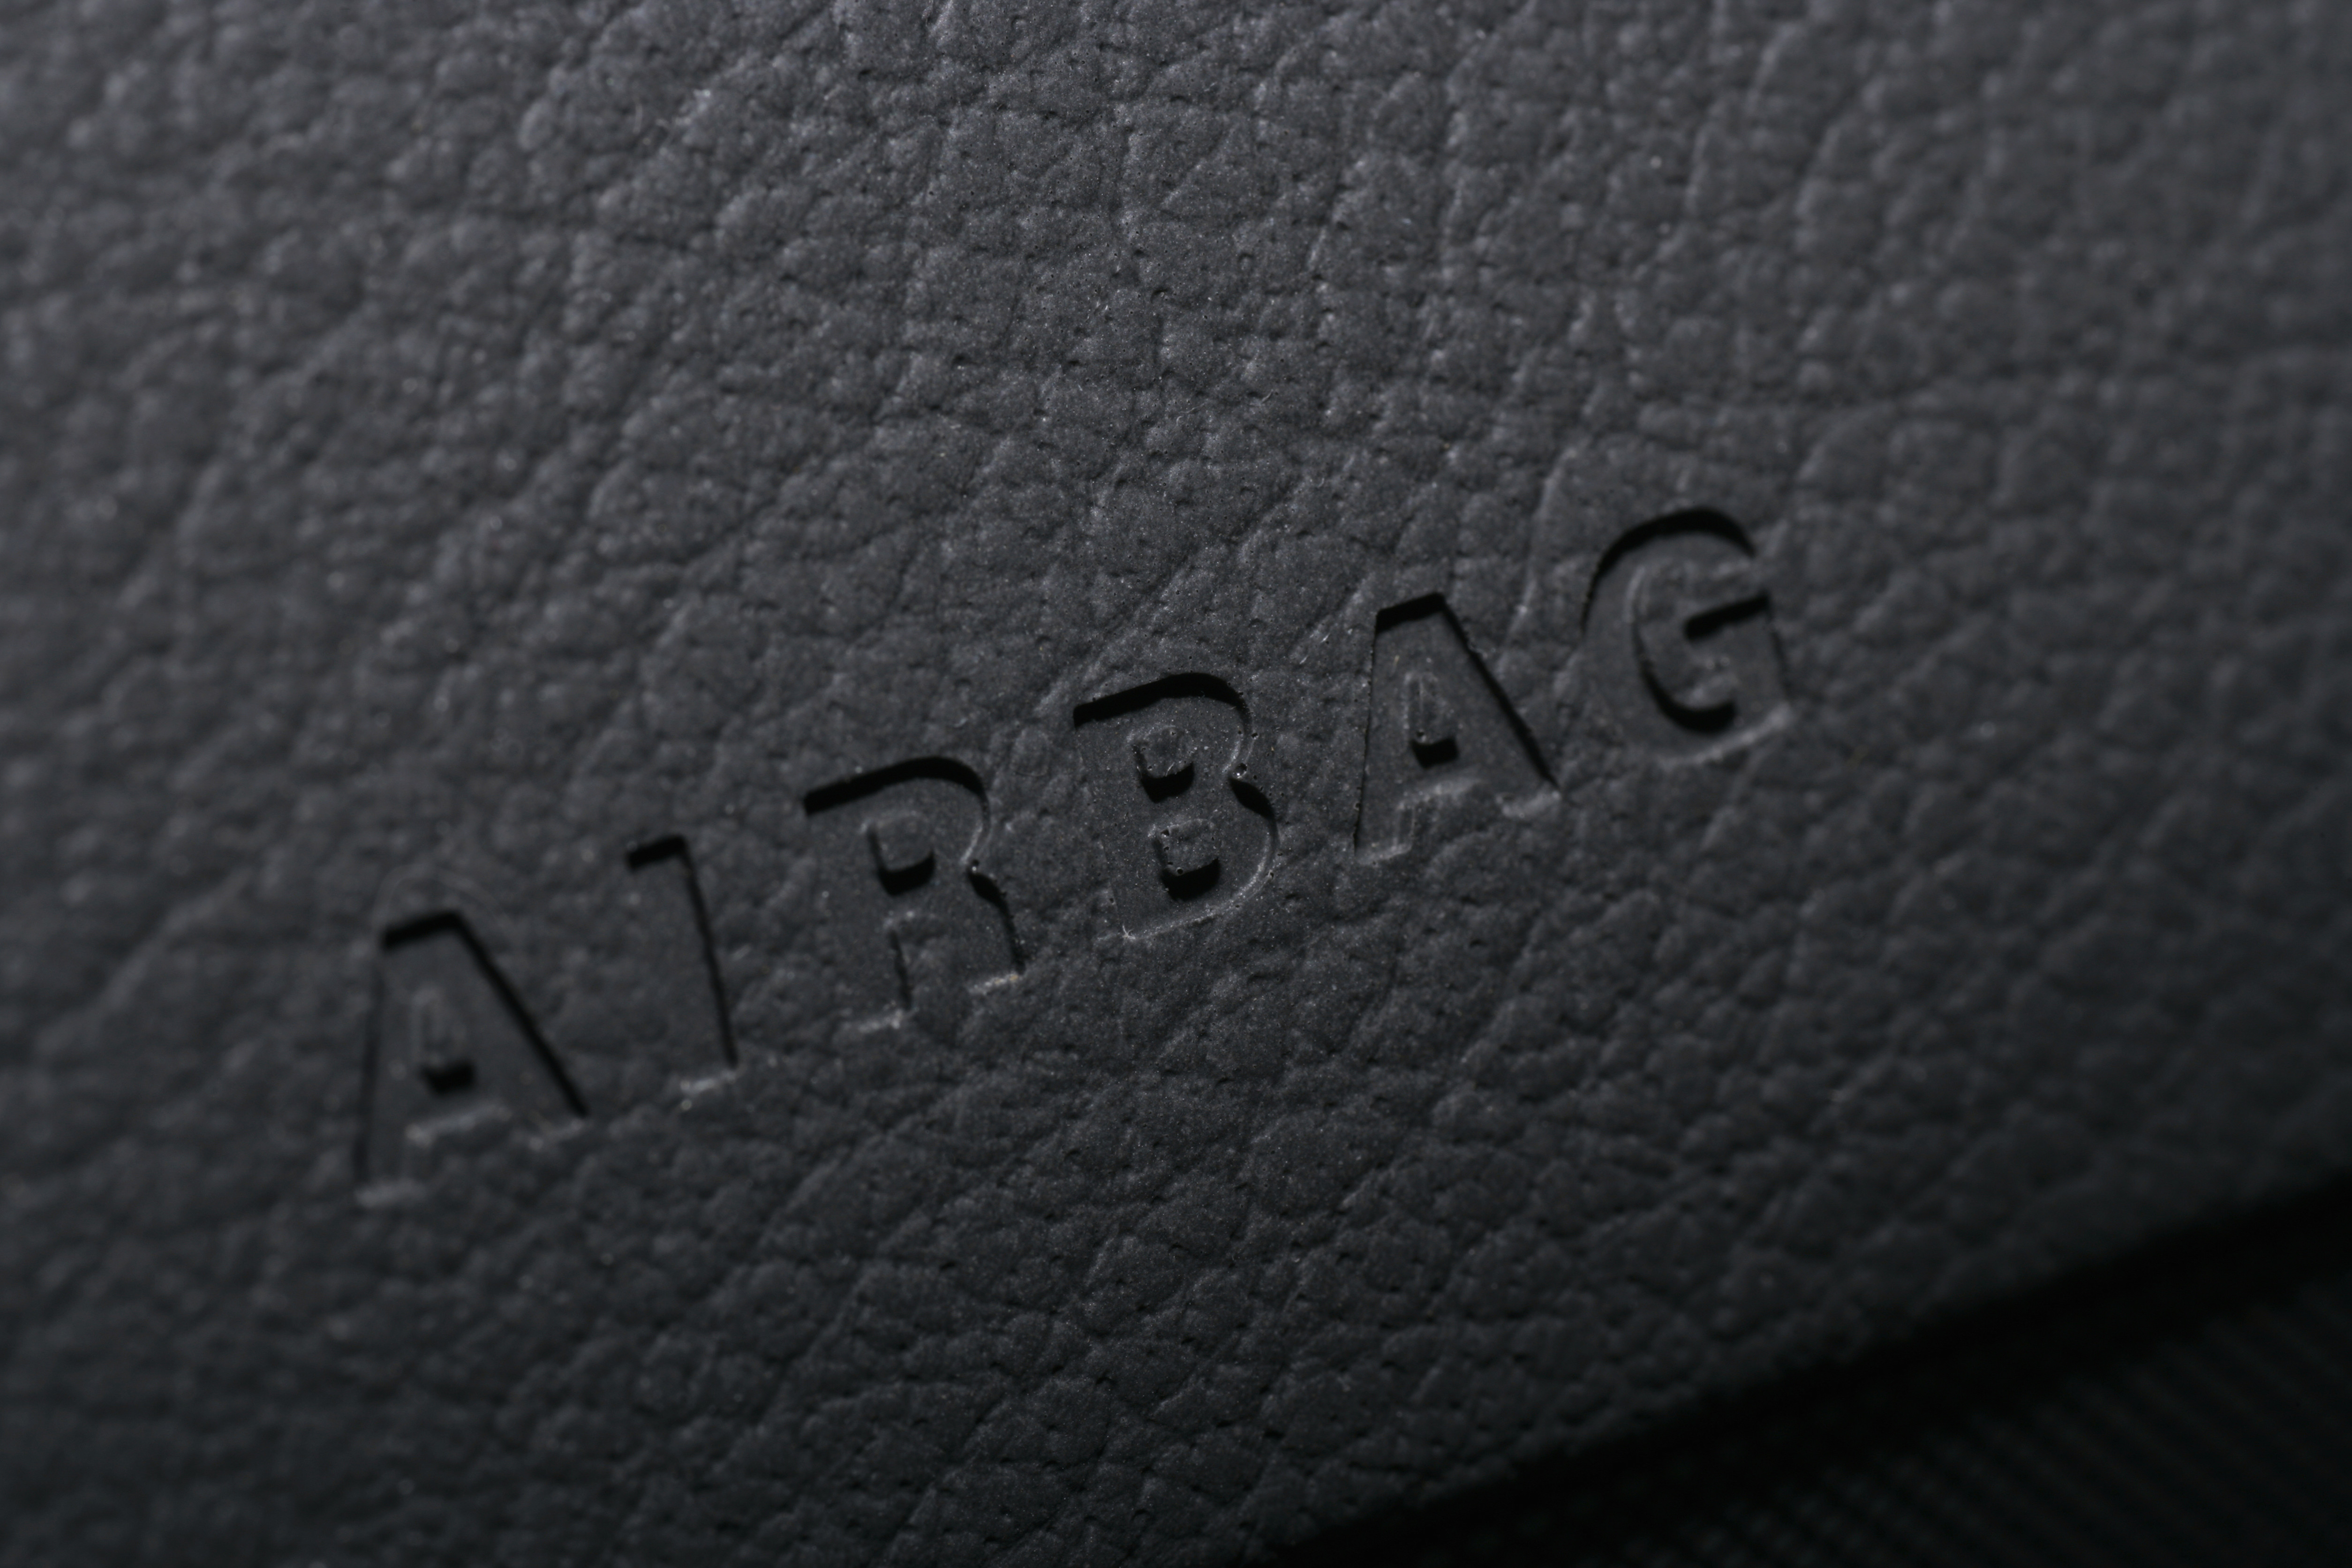 Tennessee company refuses US request to recall 67 million potentially dangerous air bag inflators